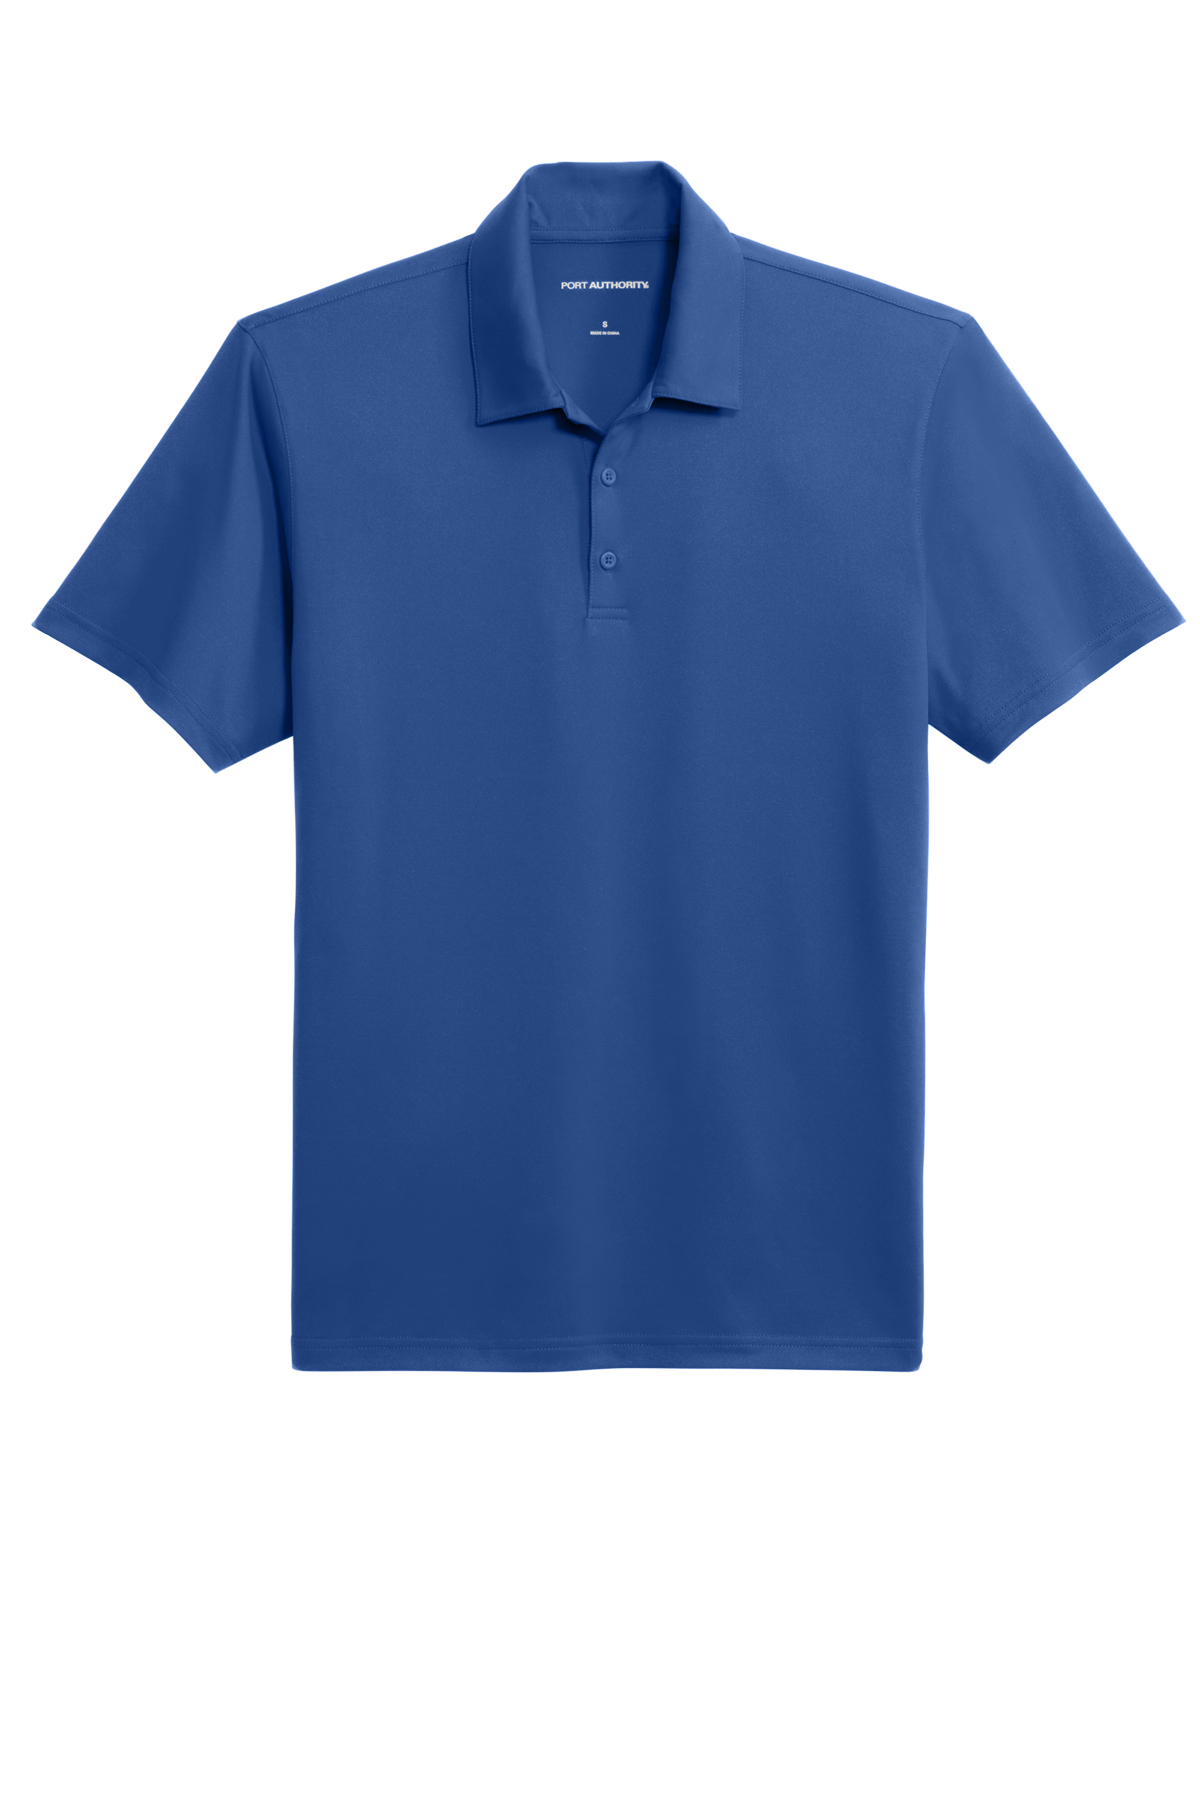 Port Authority Performance Staff Polo | Product | SanMar